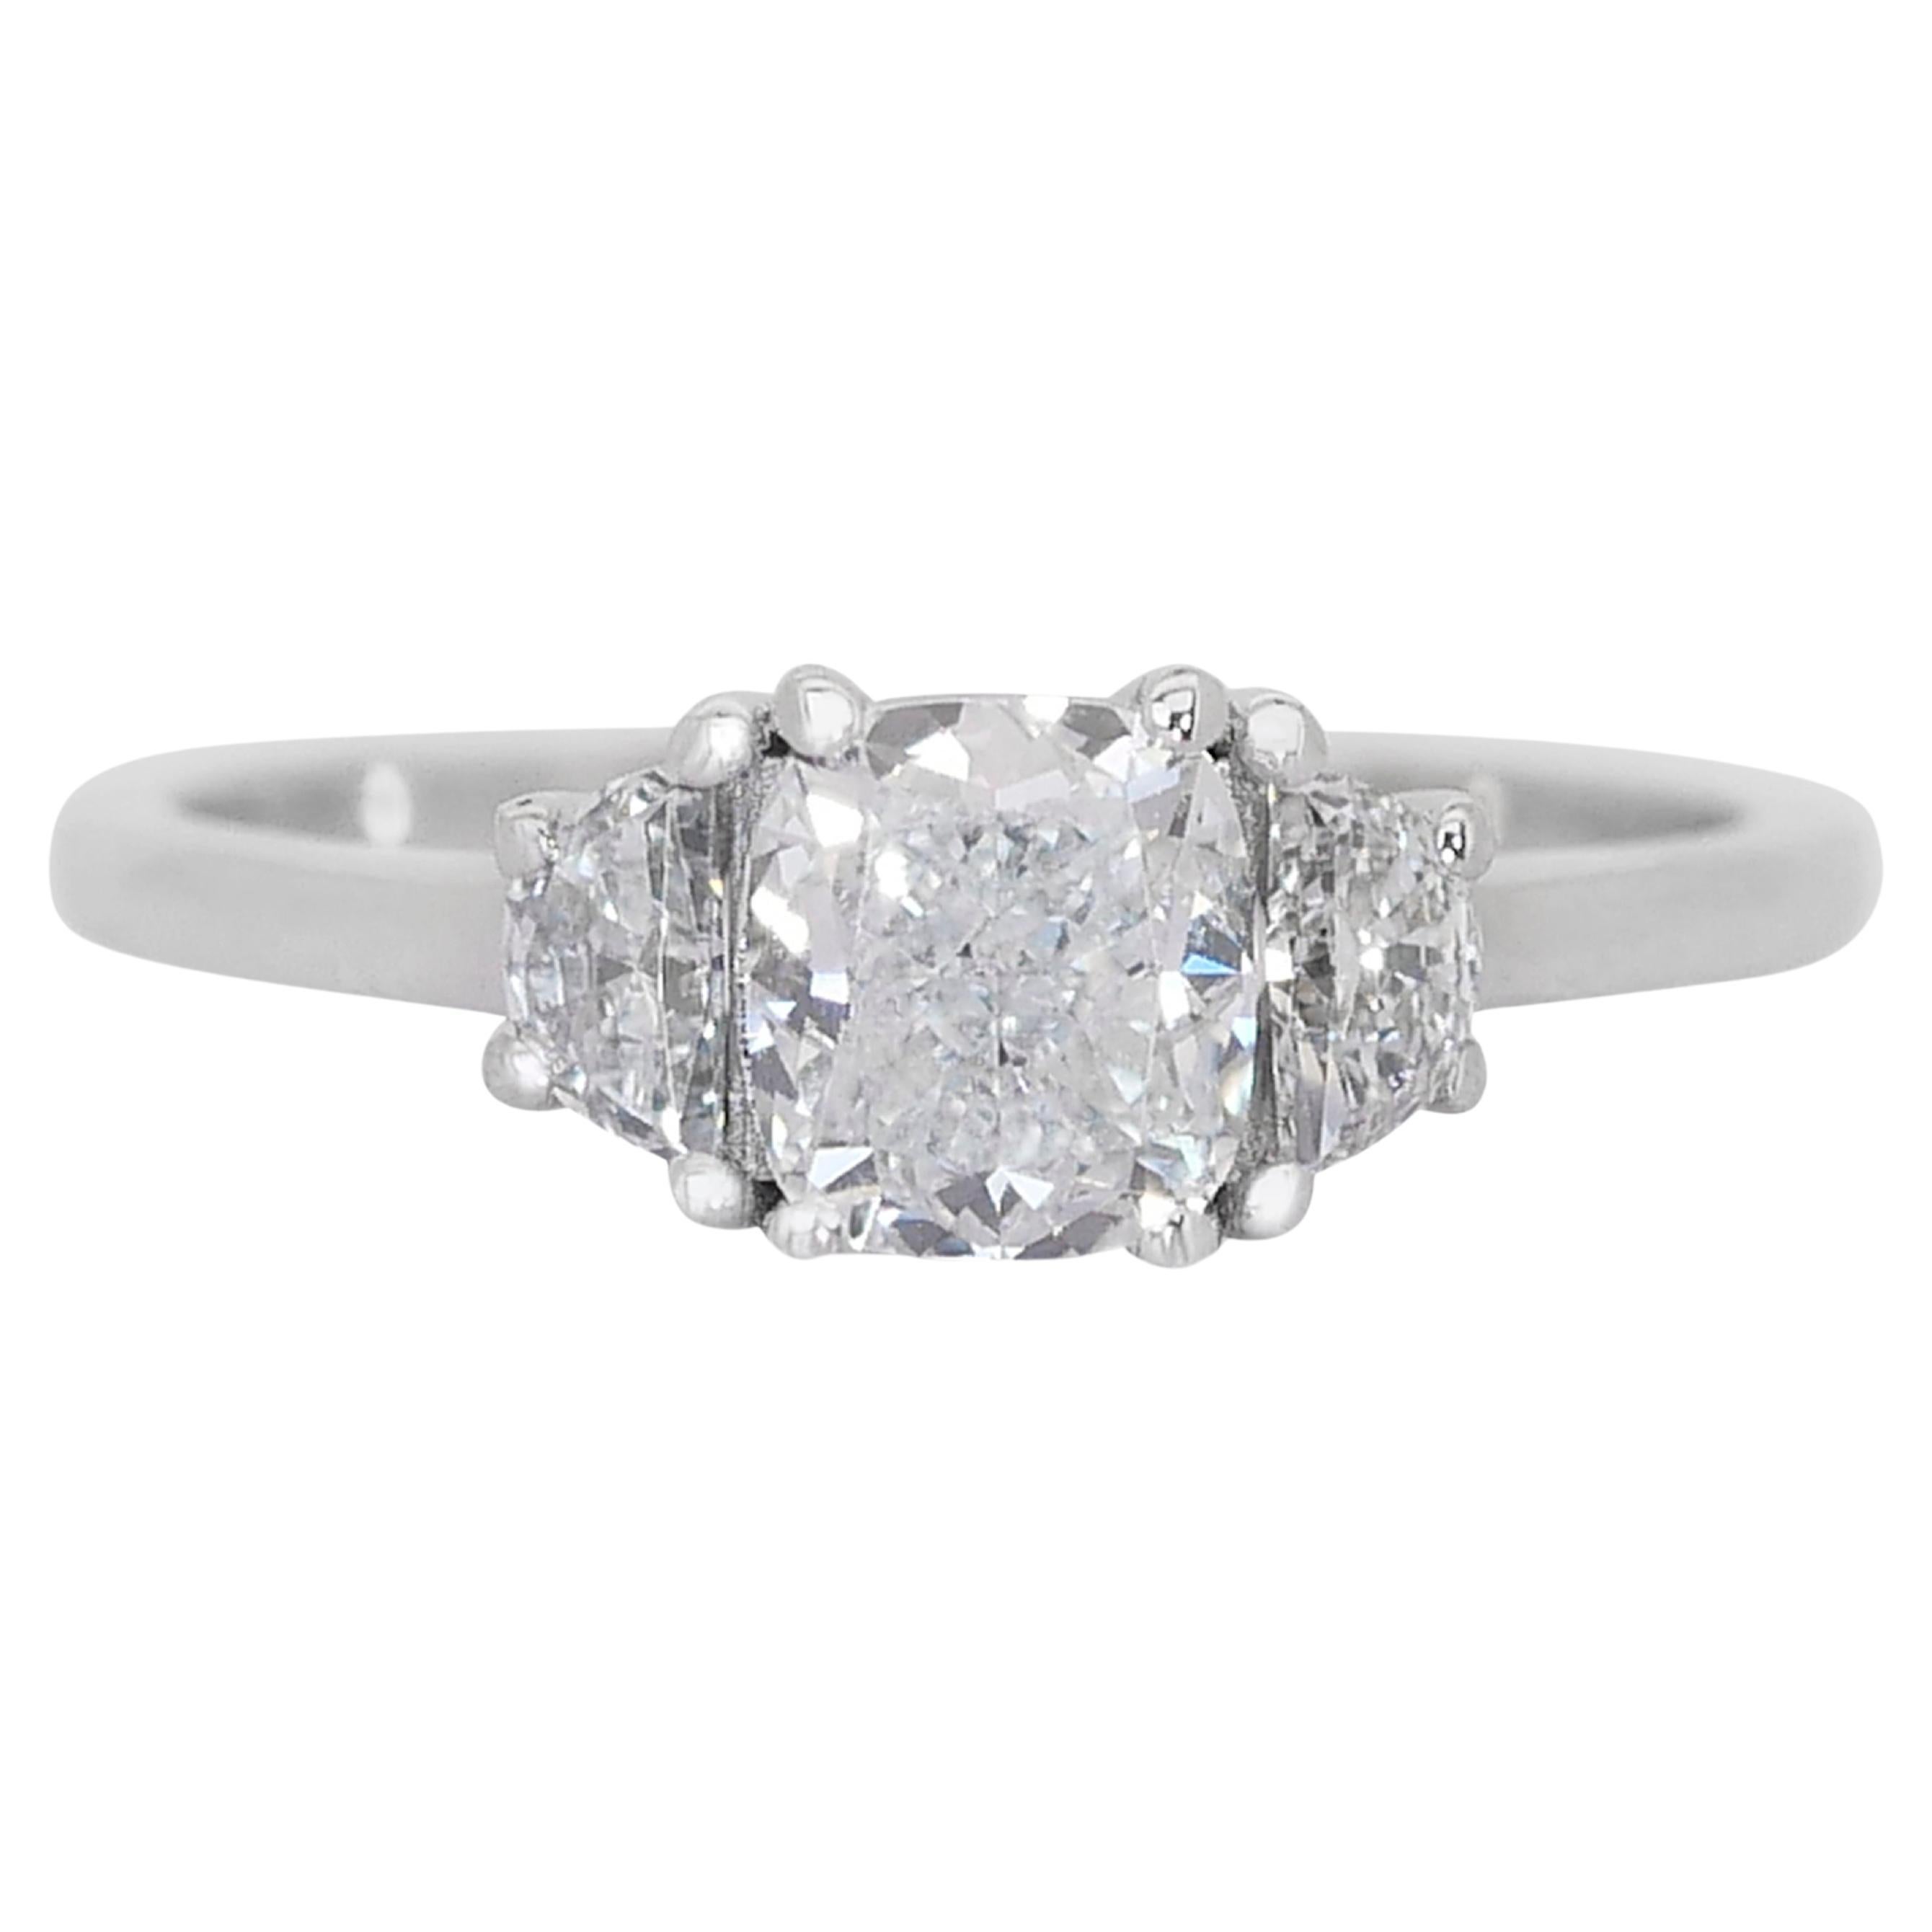 Glamorous 18K White Gold Natural Diamond Ring with 1.25 ct - GIA & AIG Certified For Sale